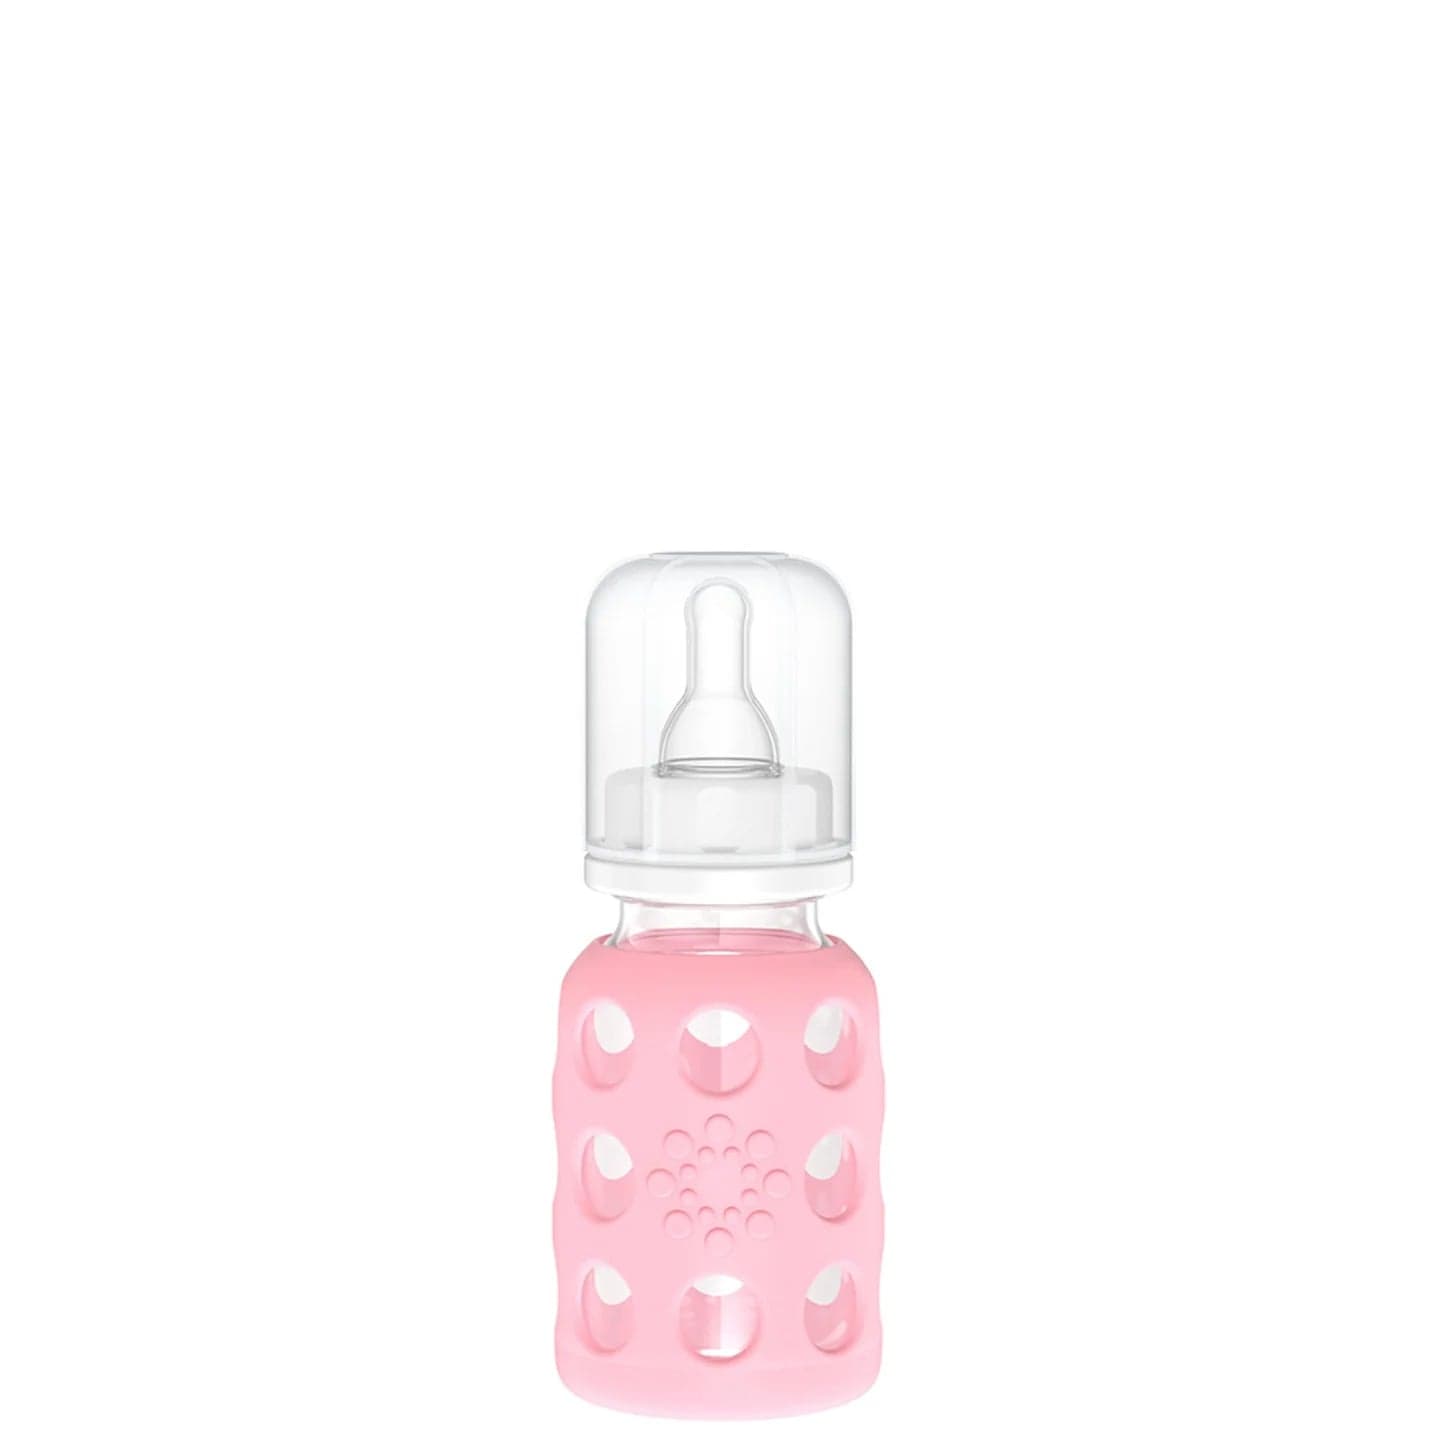 Lifefactory Soother (Pink) Lifefactory 4oz Glass Baby Bottle - Stage 1 Nipple, Stopper, and Cap (Pink)